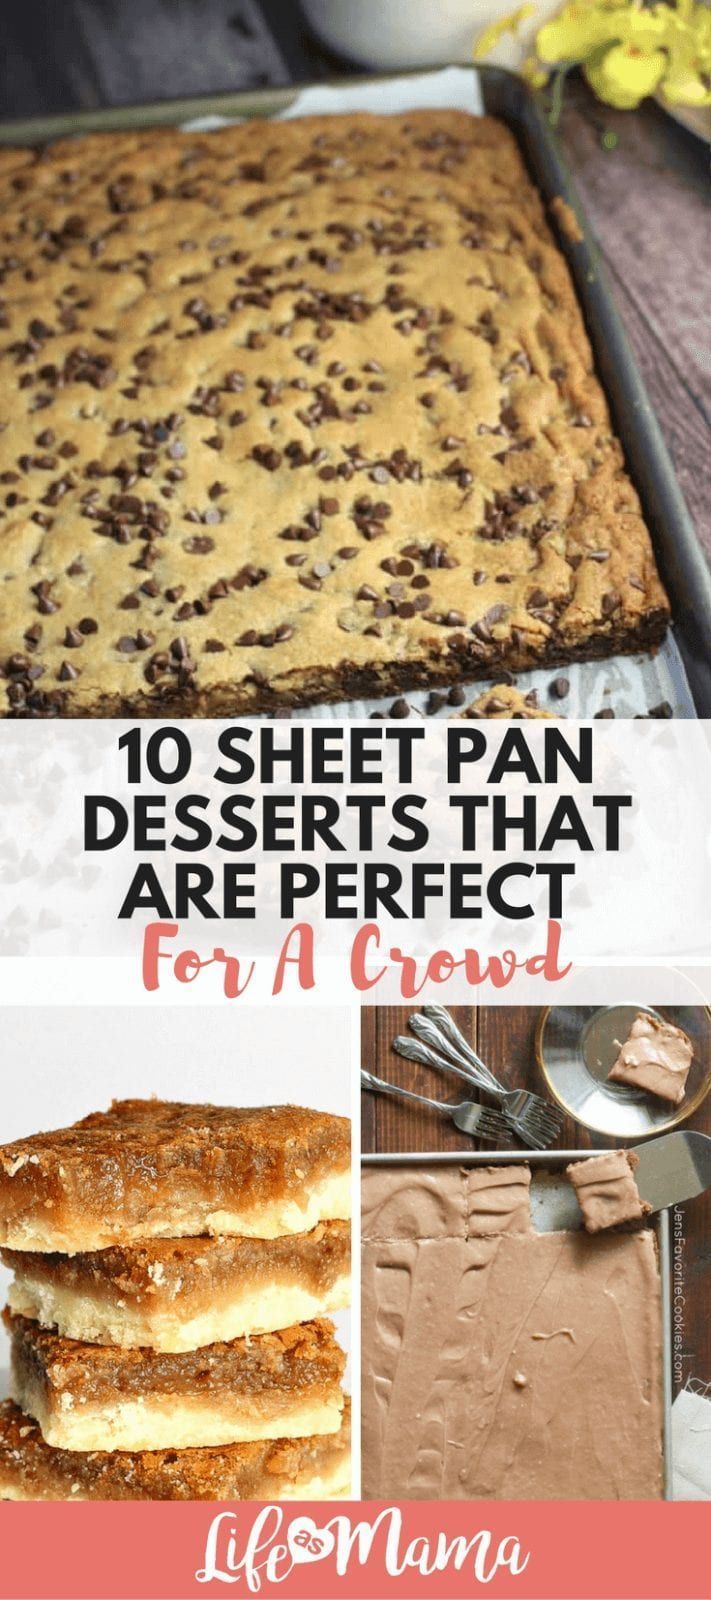 10 Sheet Pan Desserts That Are Perfect For A Crowd -   16 party desserts Healthy ideas